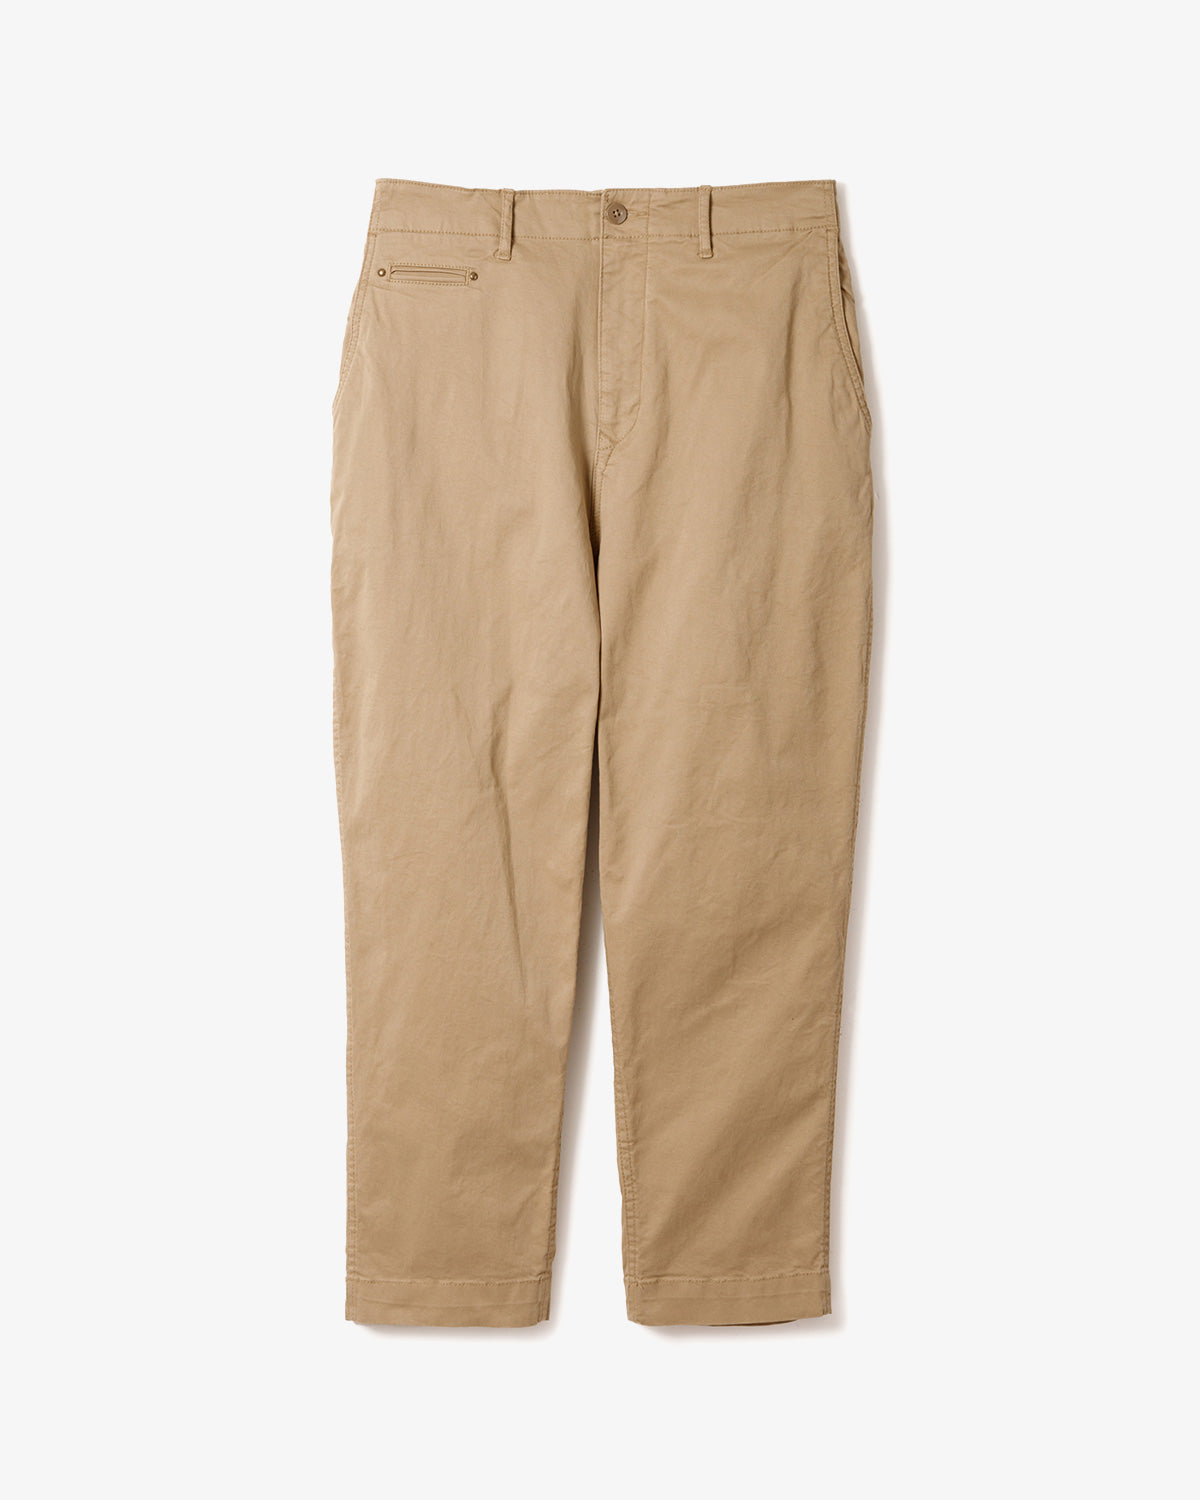 GINGER掲載商品】 チノパン XL SIZE PANT EASY BELTED saneveryone 